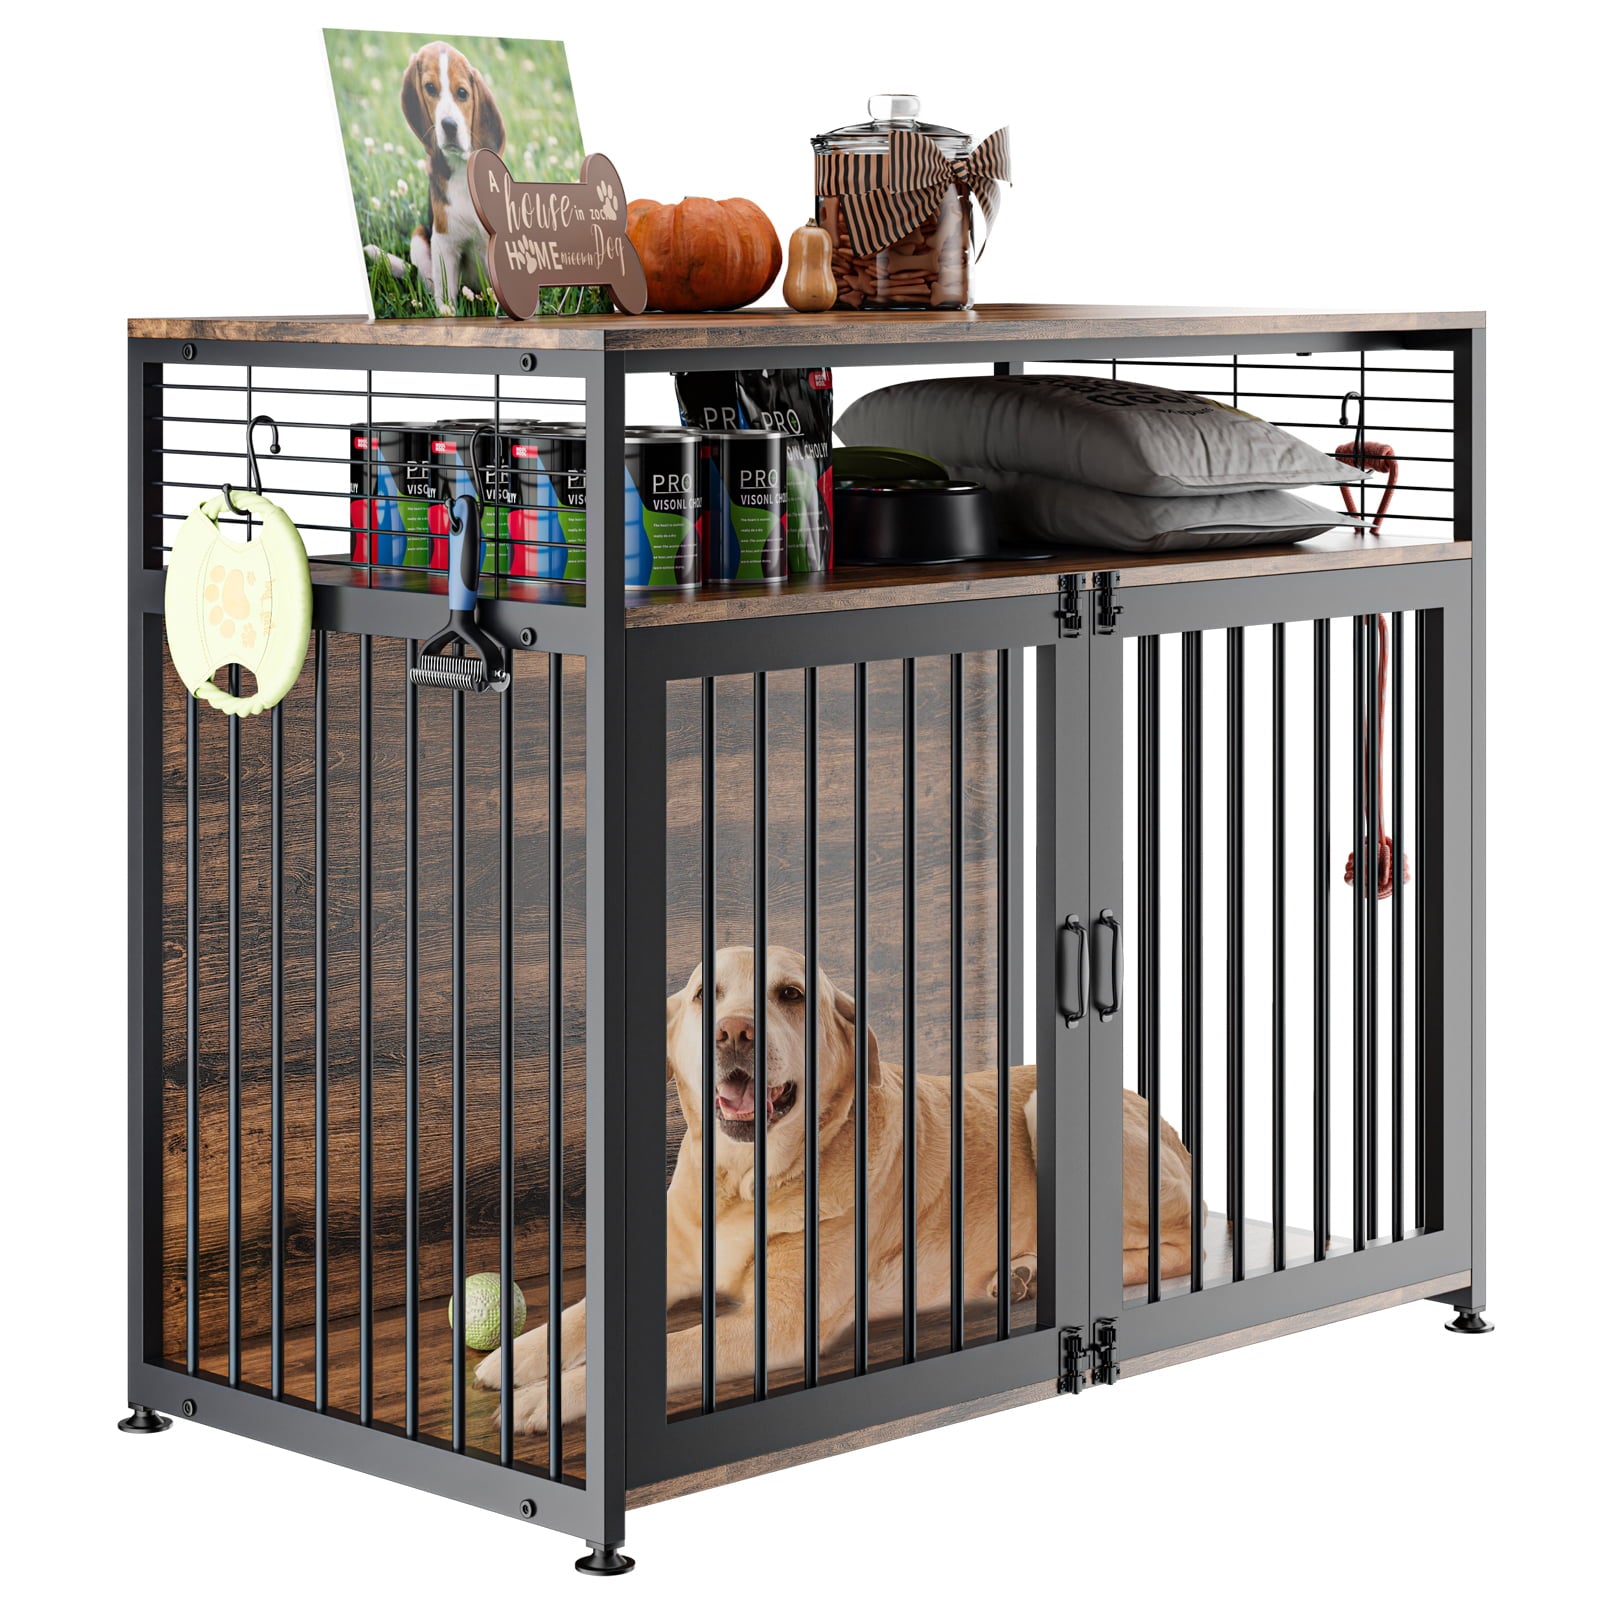 LILYPELLE Dog Crate Furniture， Heavy Duty Dog Cage Indoor Dog Kennel Furniture Style， Double Doors Dog House for Small/Medium/Large Dog